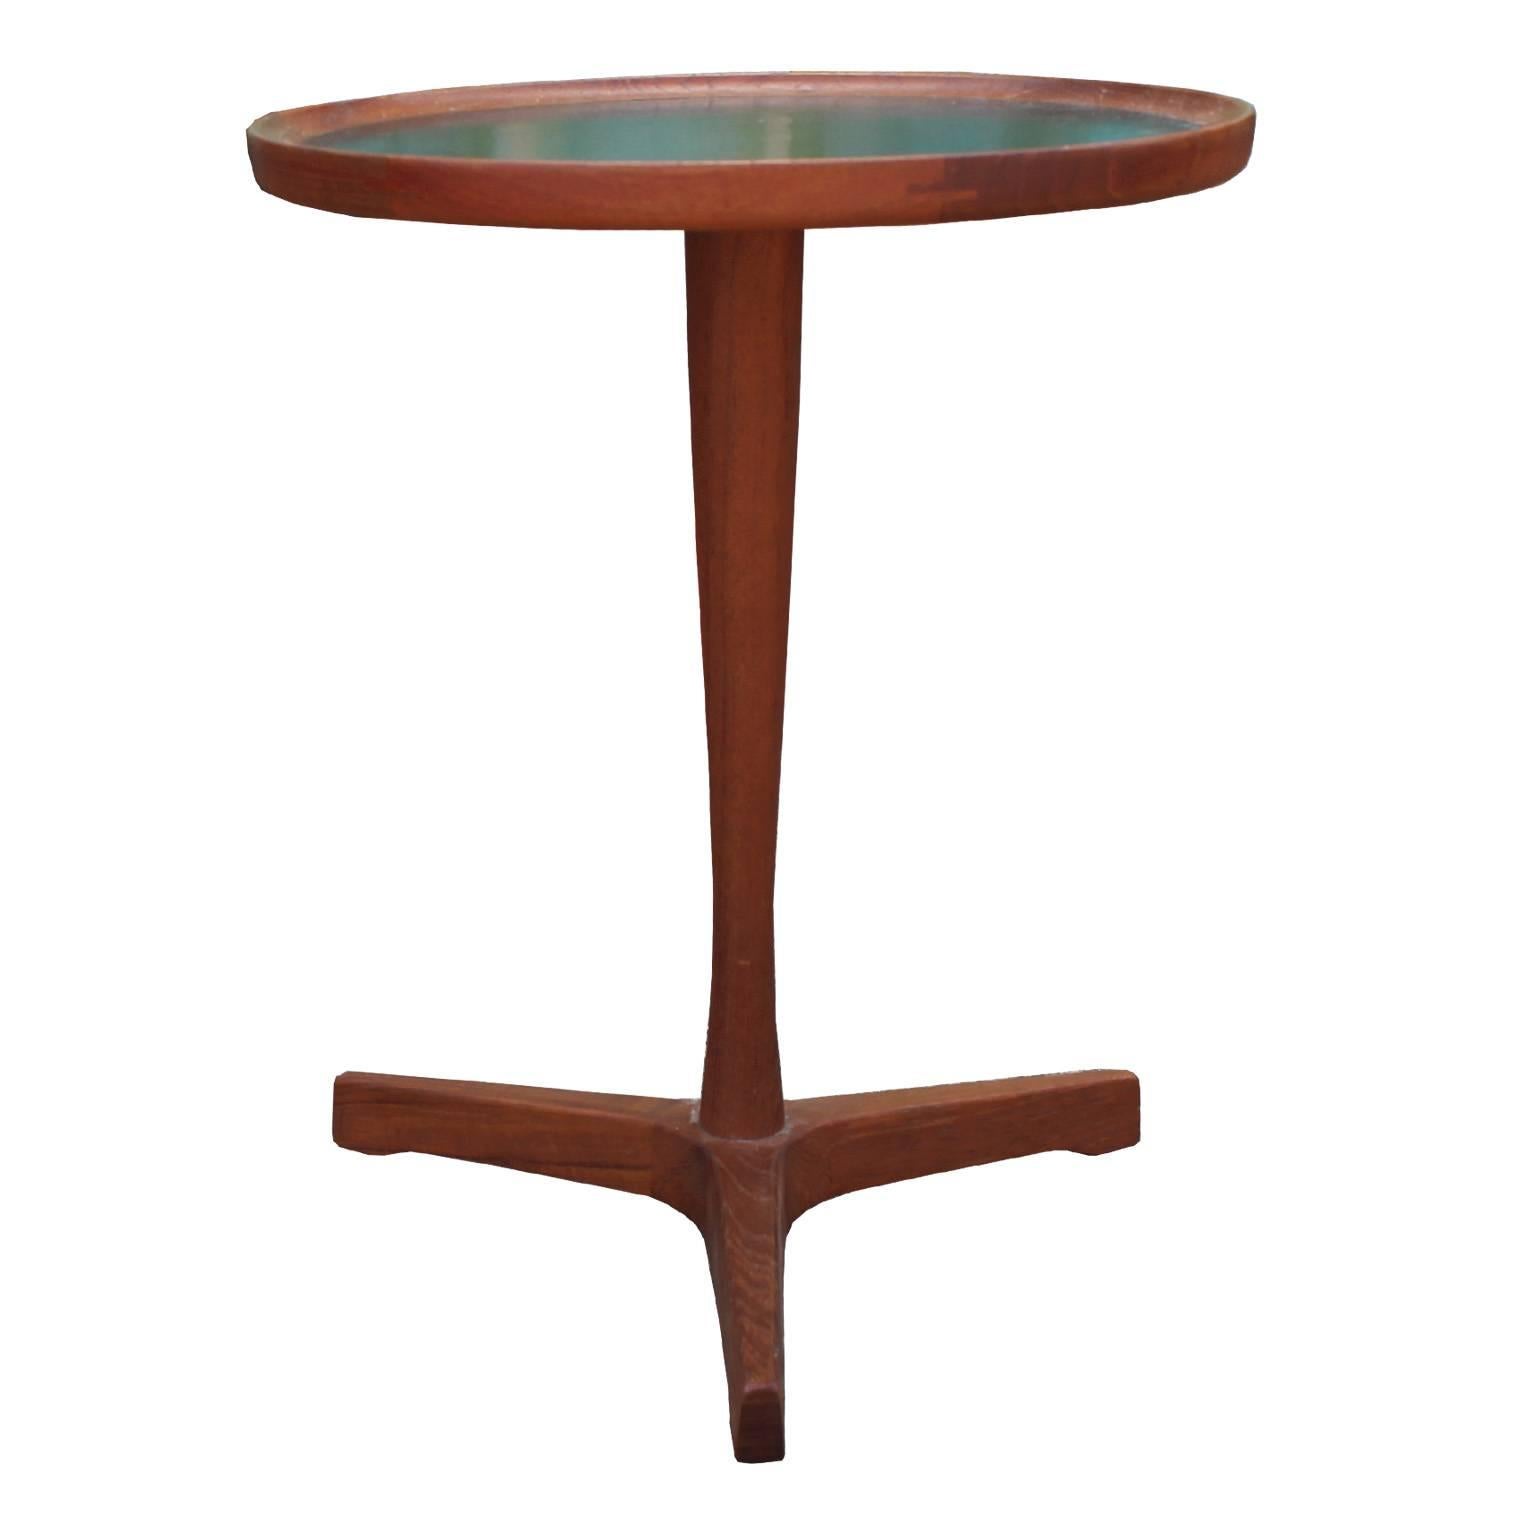 Excellent pair of round side tables by Hans Andersen. Teak Pedestal, tripod base with a black veneered top. Perfect in a Scandinavian, Mid-Century, or Modern interior. In great condition.